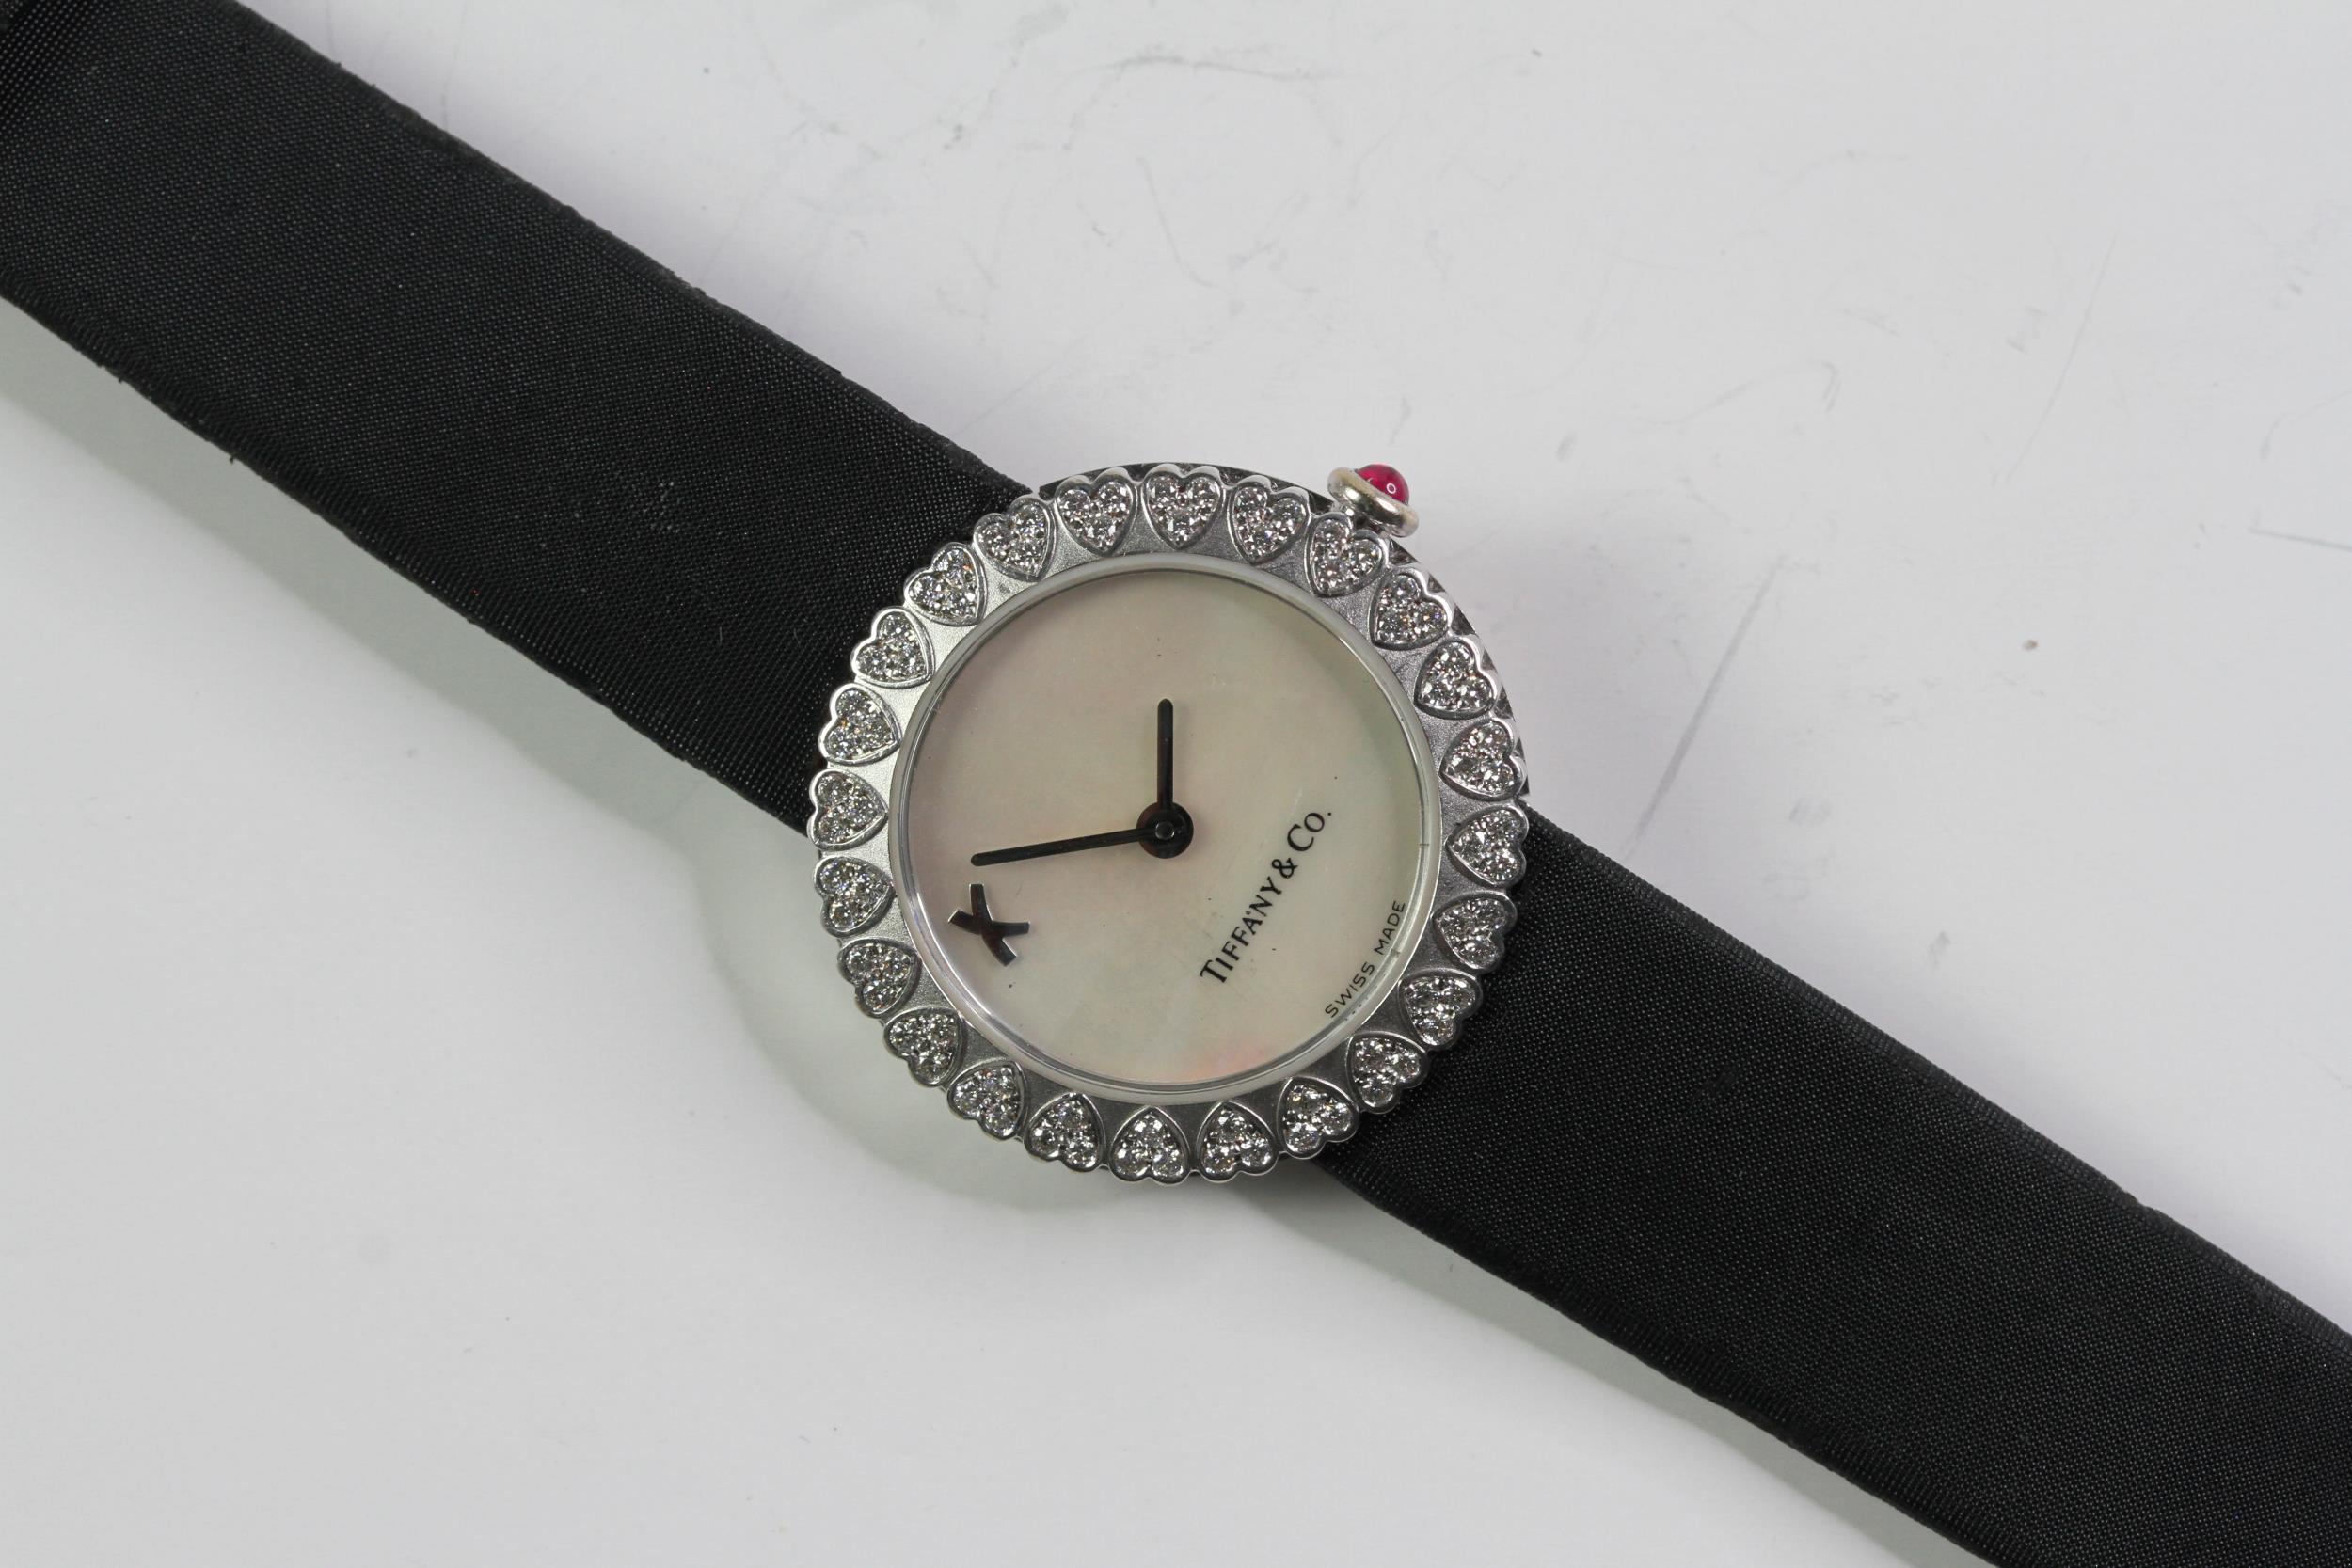 LADIES 18CT TIFFANY & CO KISS PICASSO QUARTZ WATCH, circular mother of pearl dial, diamond heart